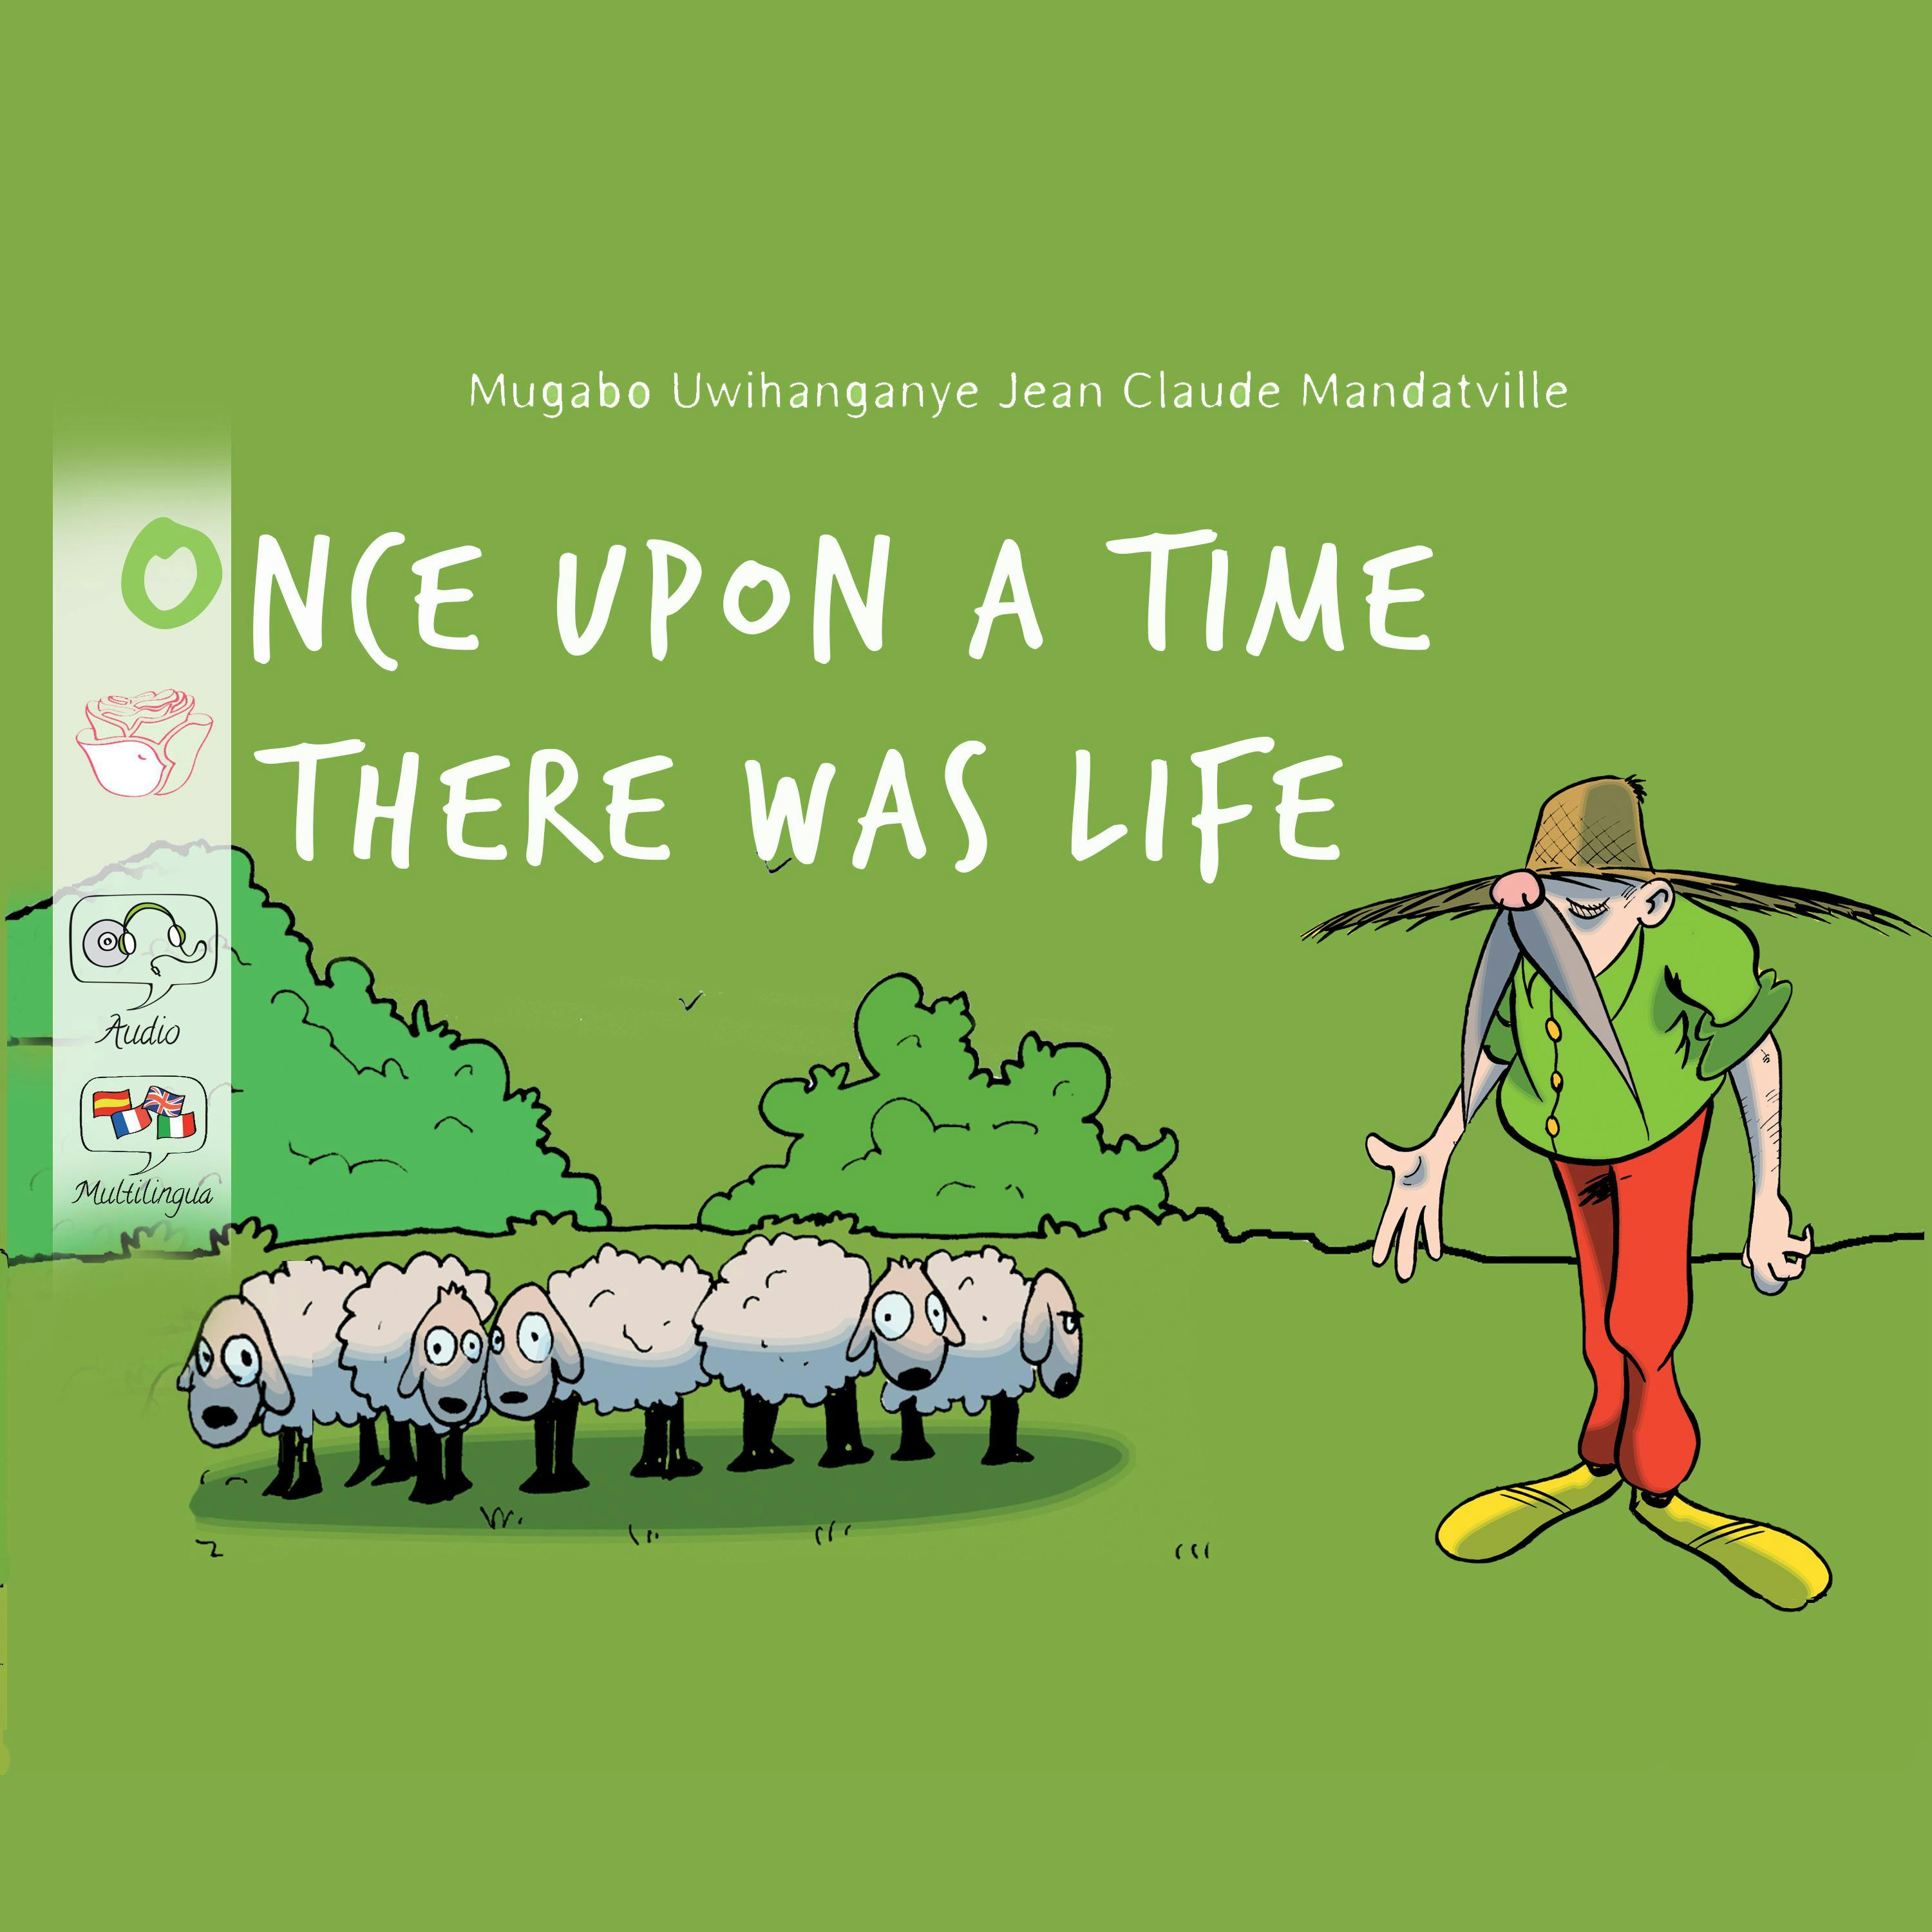 Once upon a time there was Life - Jean Claude Mandatville, Suor Nikodema Babula, Andrea Marinelli